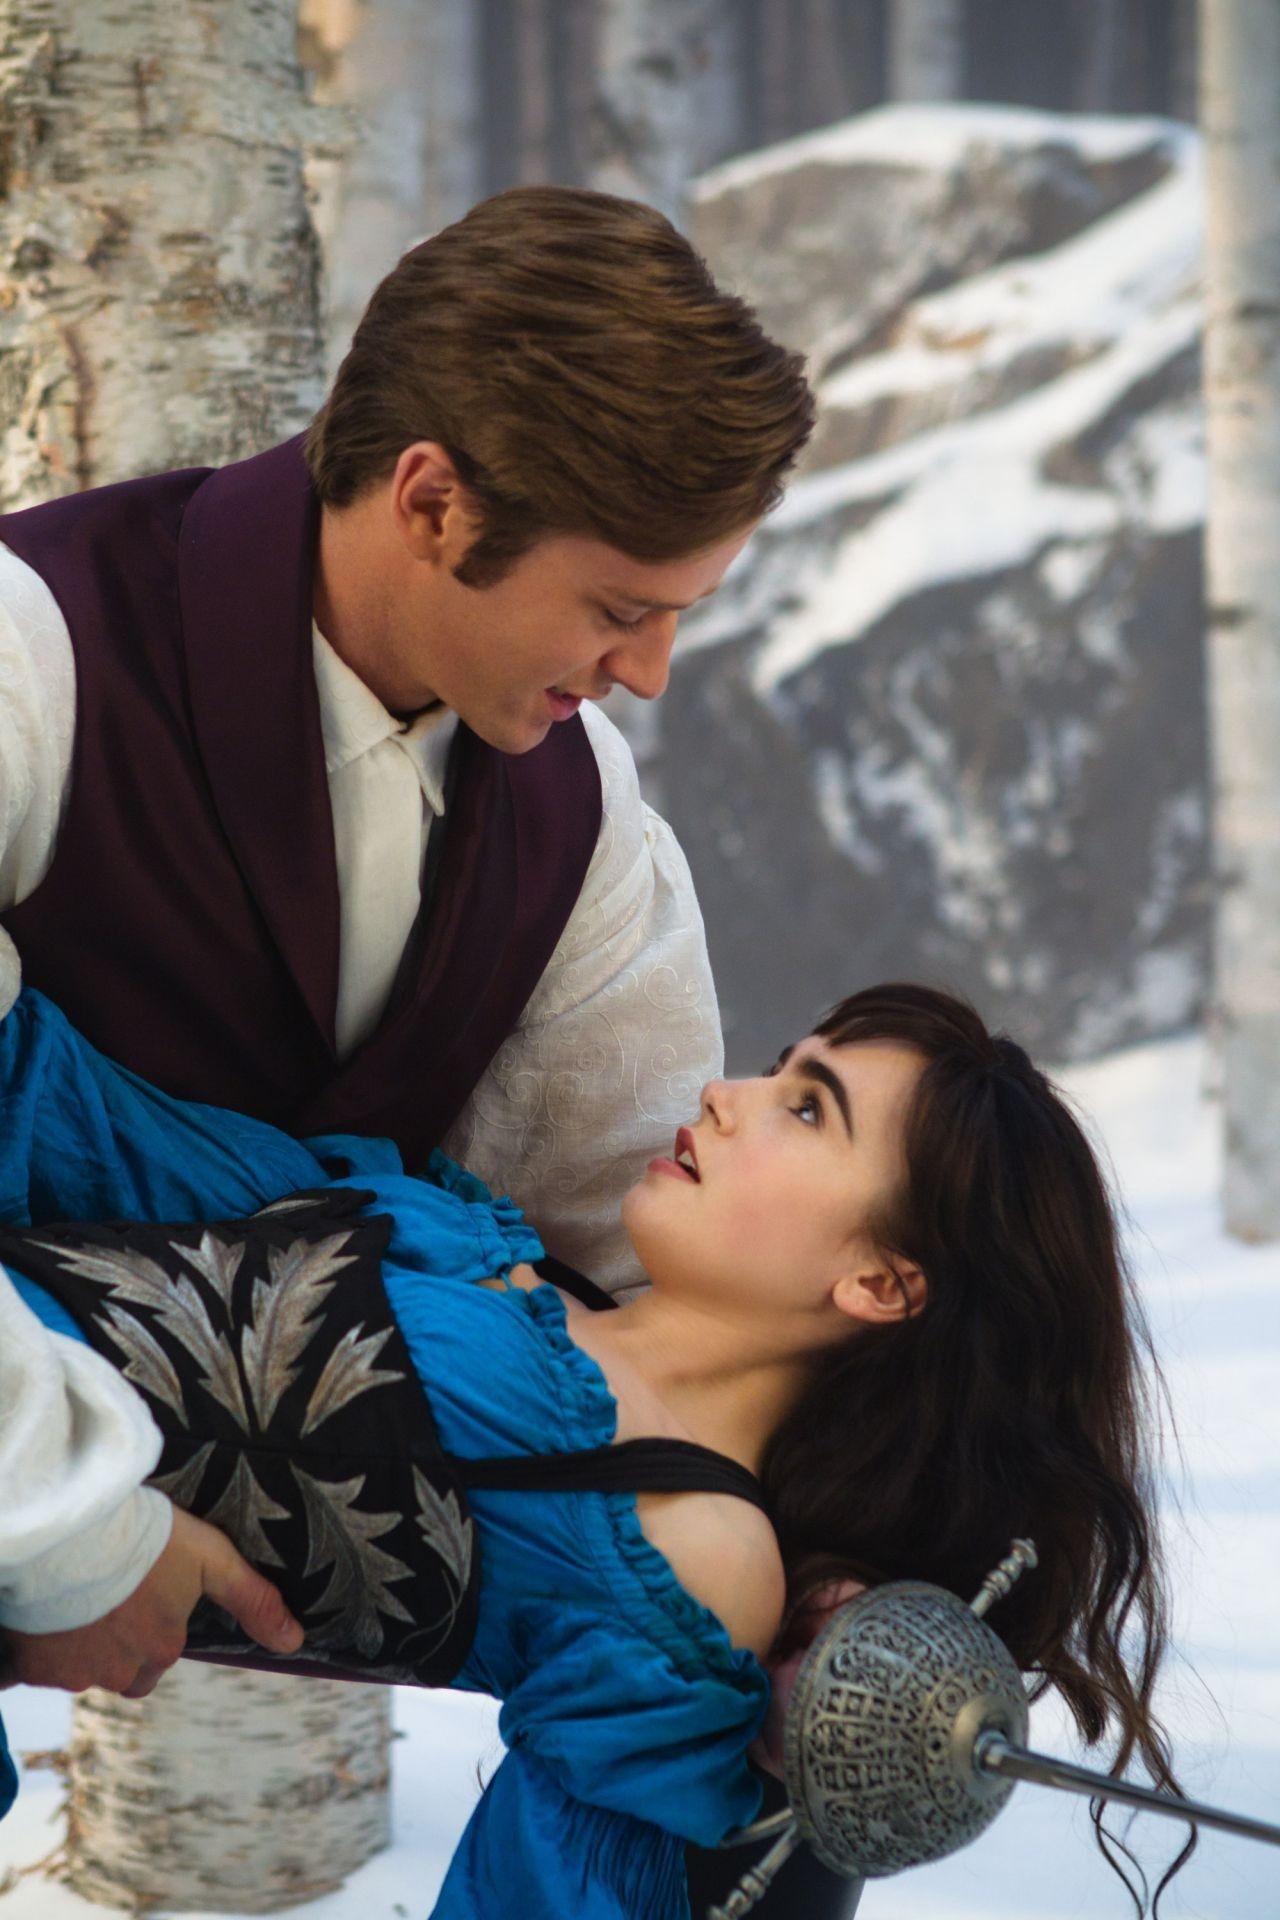 Armie Hammer stars as Prince Andrew Alcott and Lily Collins stars as Snow White in Relativity Media's Mirror Mirror (2012). Photo credit by Jan Thijs.